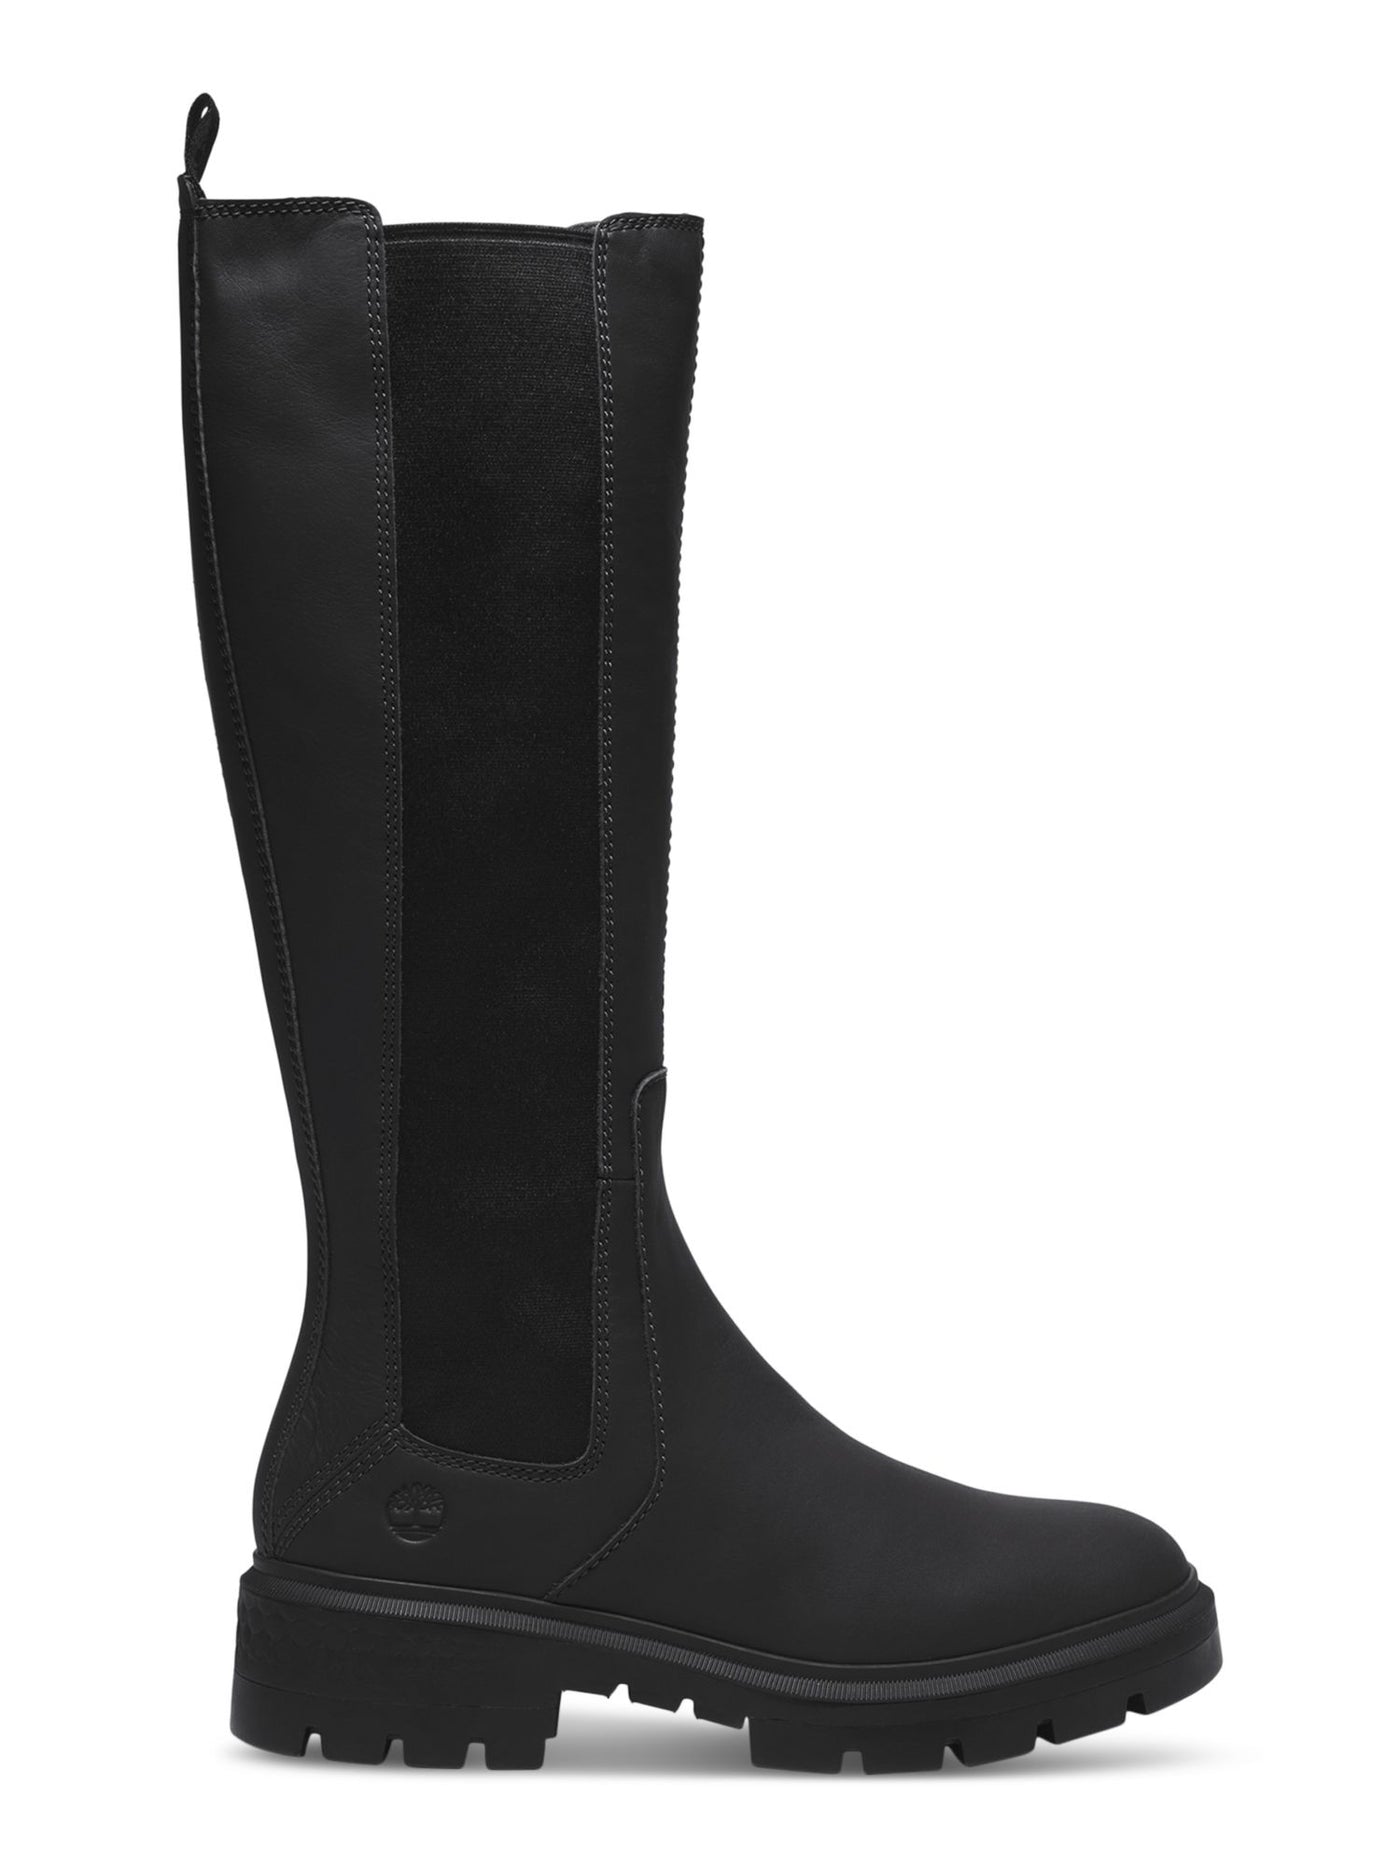 TIMBERLAND Womens Black Goring Riding Boot Lug Sole Padded Removable Insole Cortina Round Toe Block Heel Leather Chelsea 9